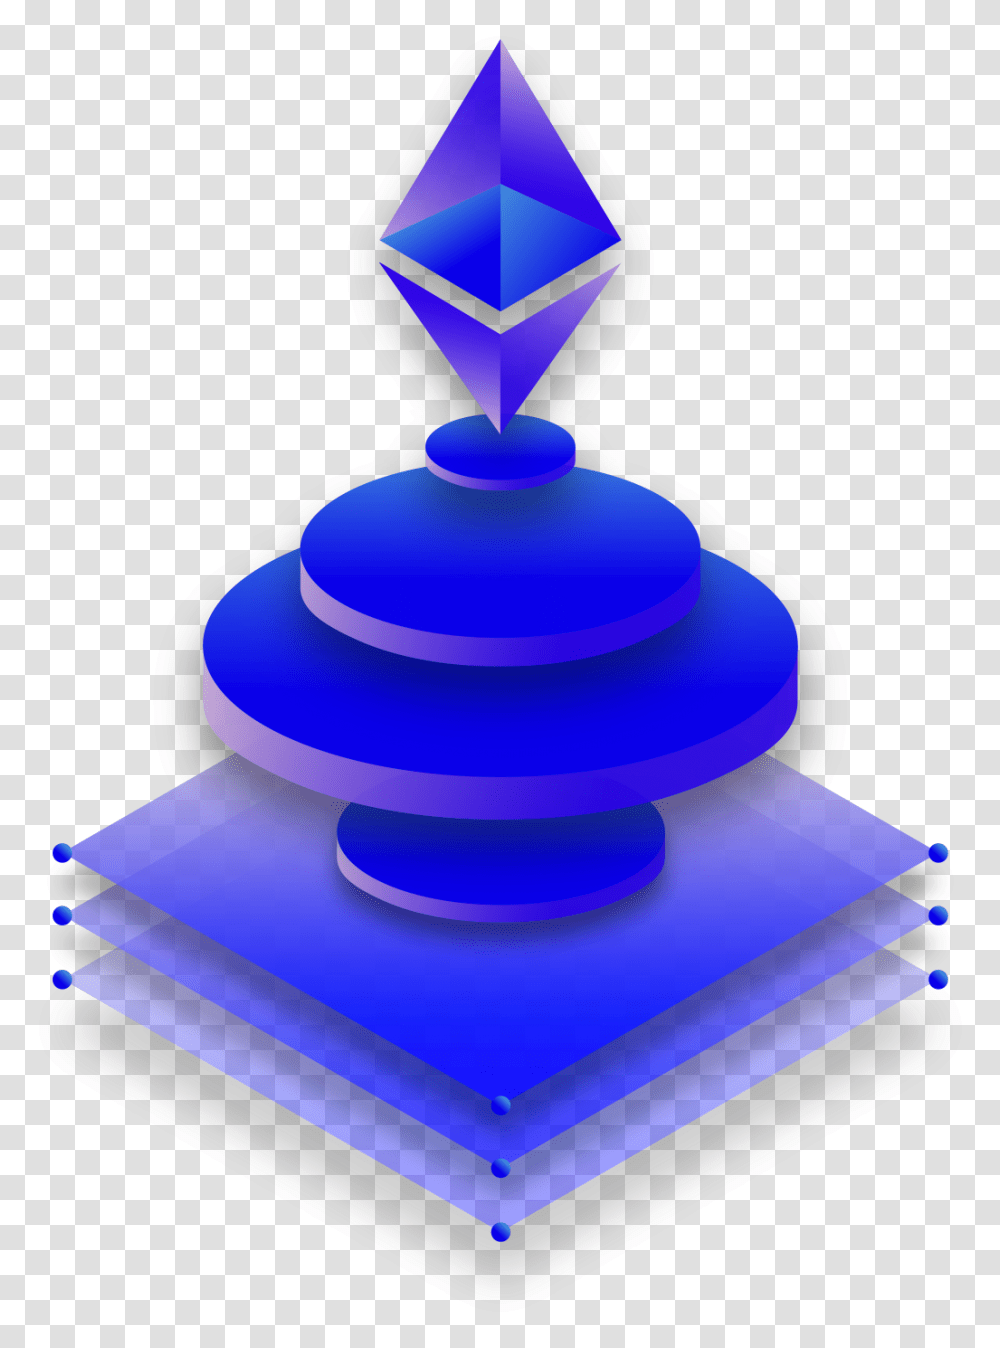 Electric Blue, Trophy, Sphere, Lamp, Birthday Cake Transparent Png